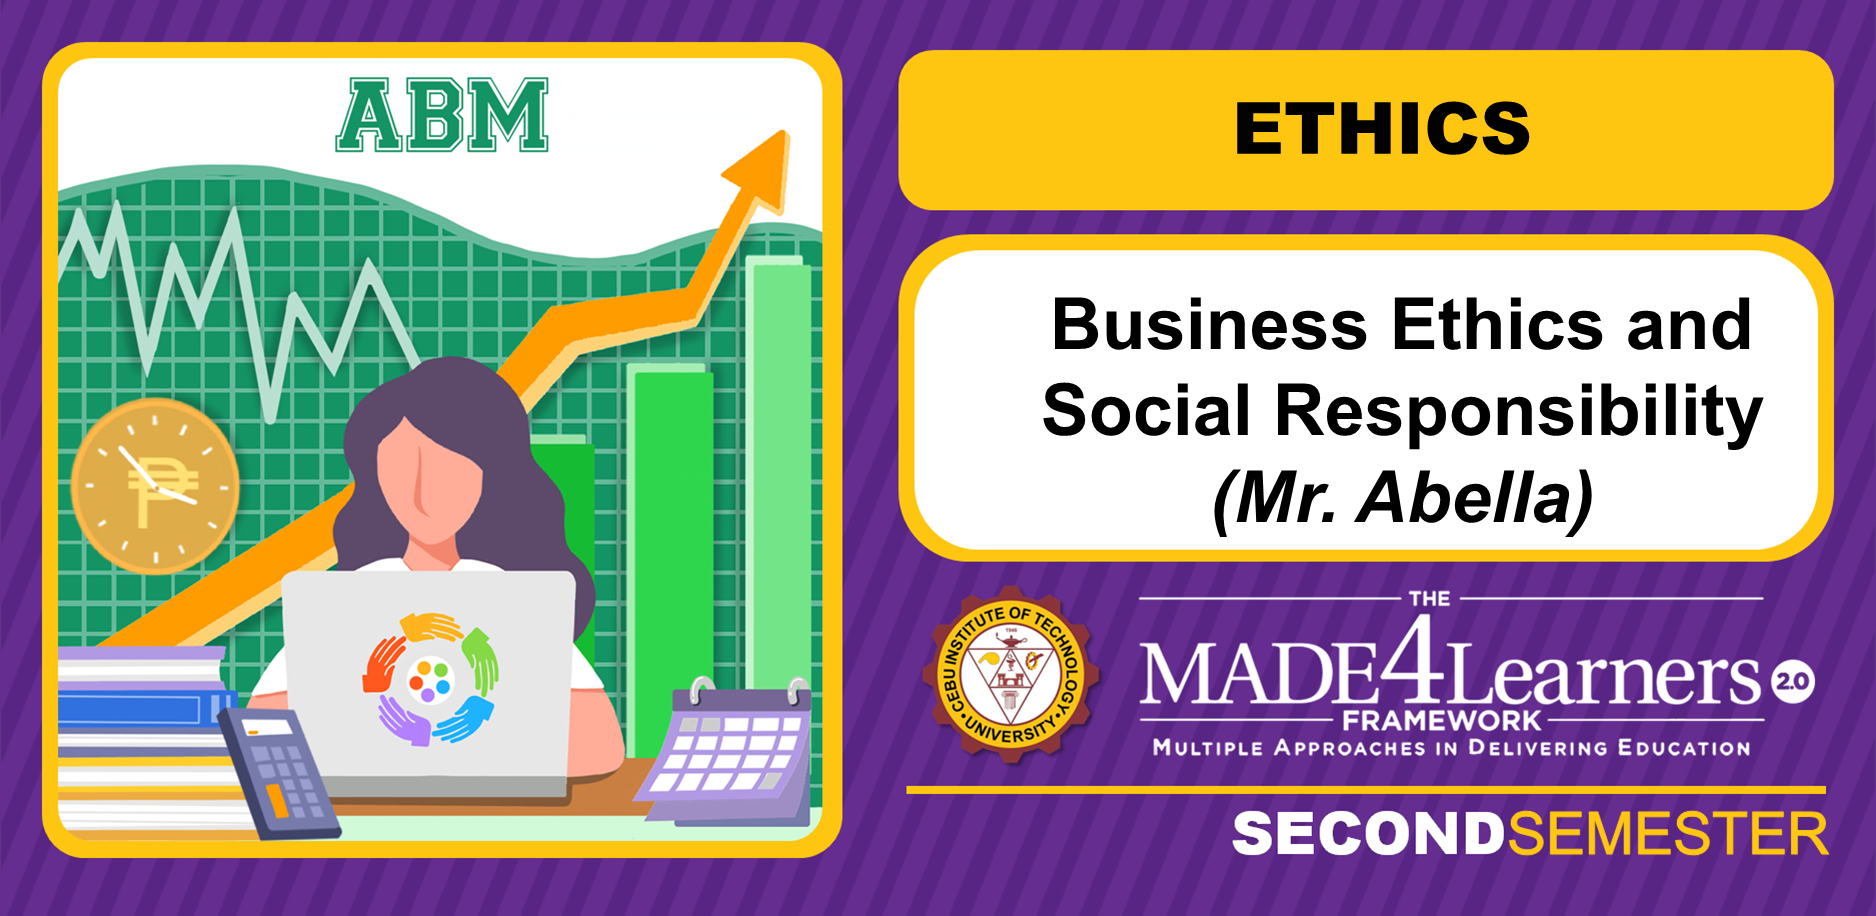 ETHICS : Business Ethics and Social Responsibility (Abella)